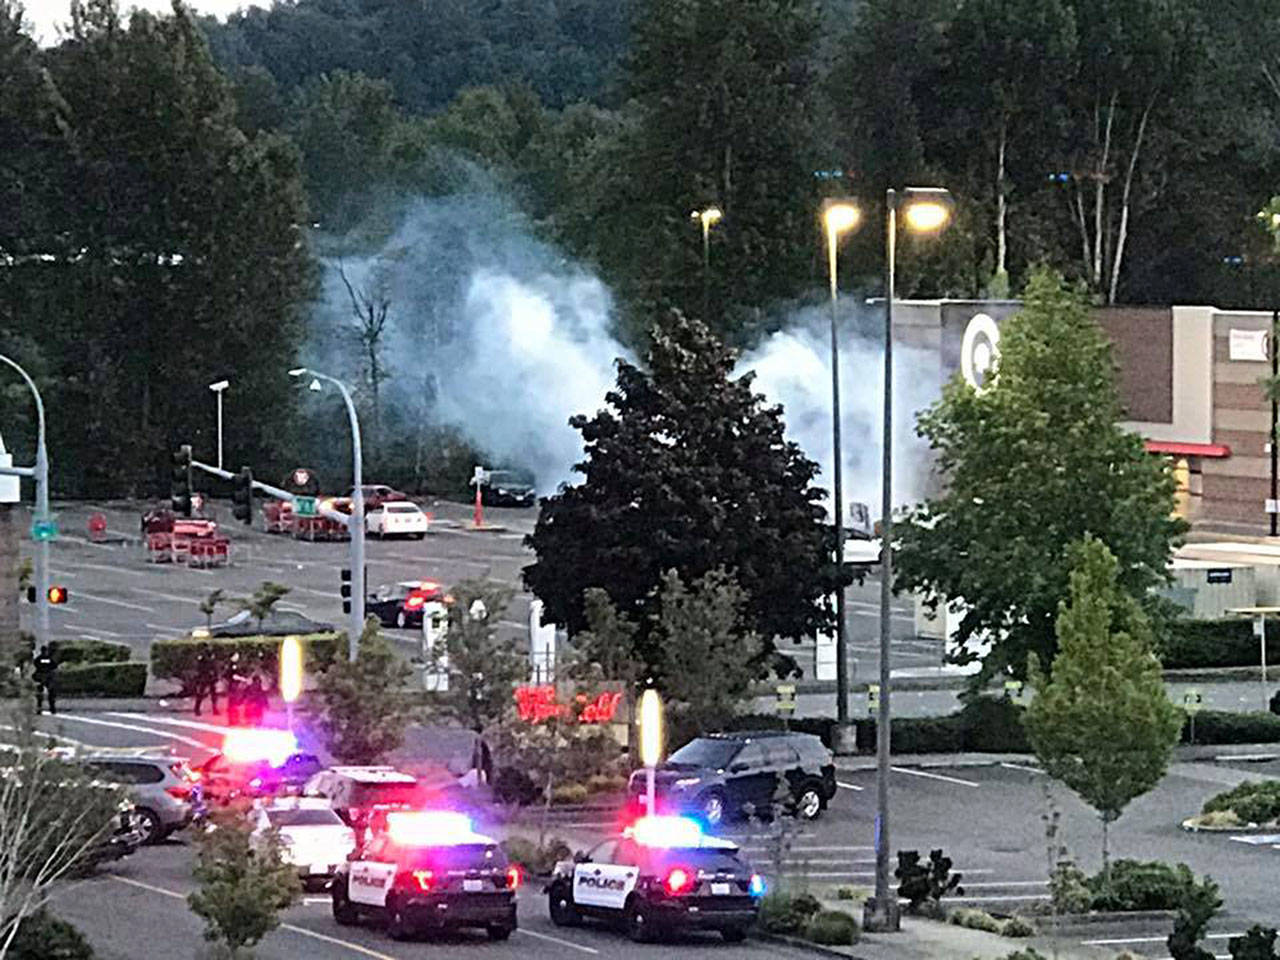 Tukwila Police use tear gas to get looters out of the Target store on Sunday night, May 31. COURTESY PHOTO, Tukwila Police